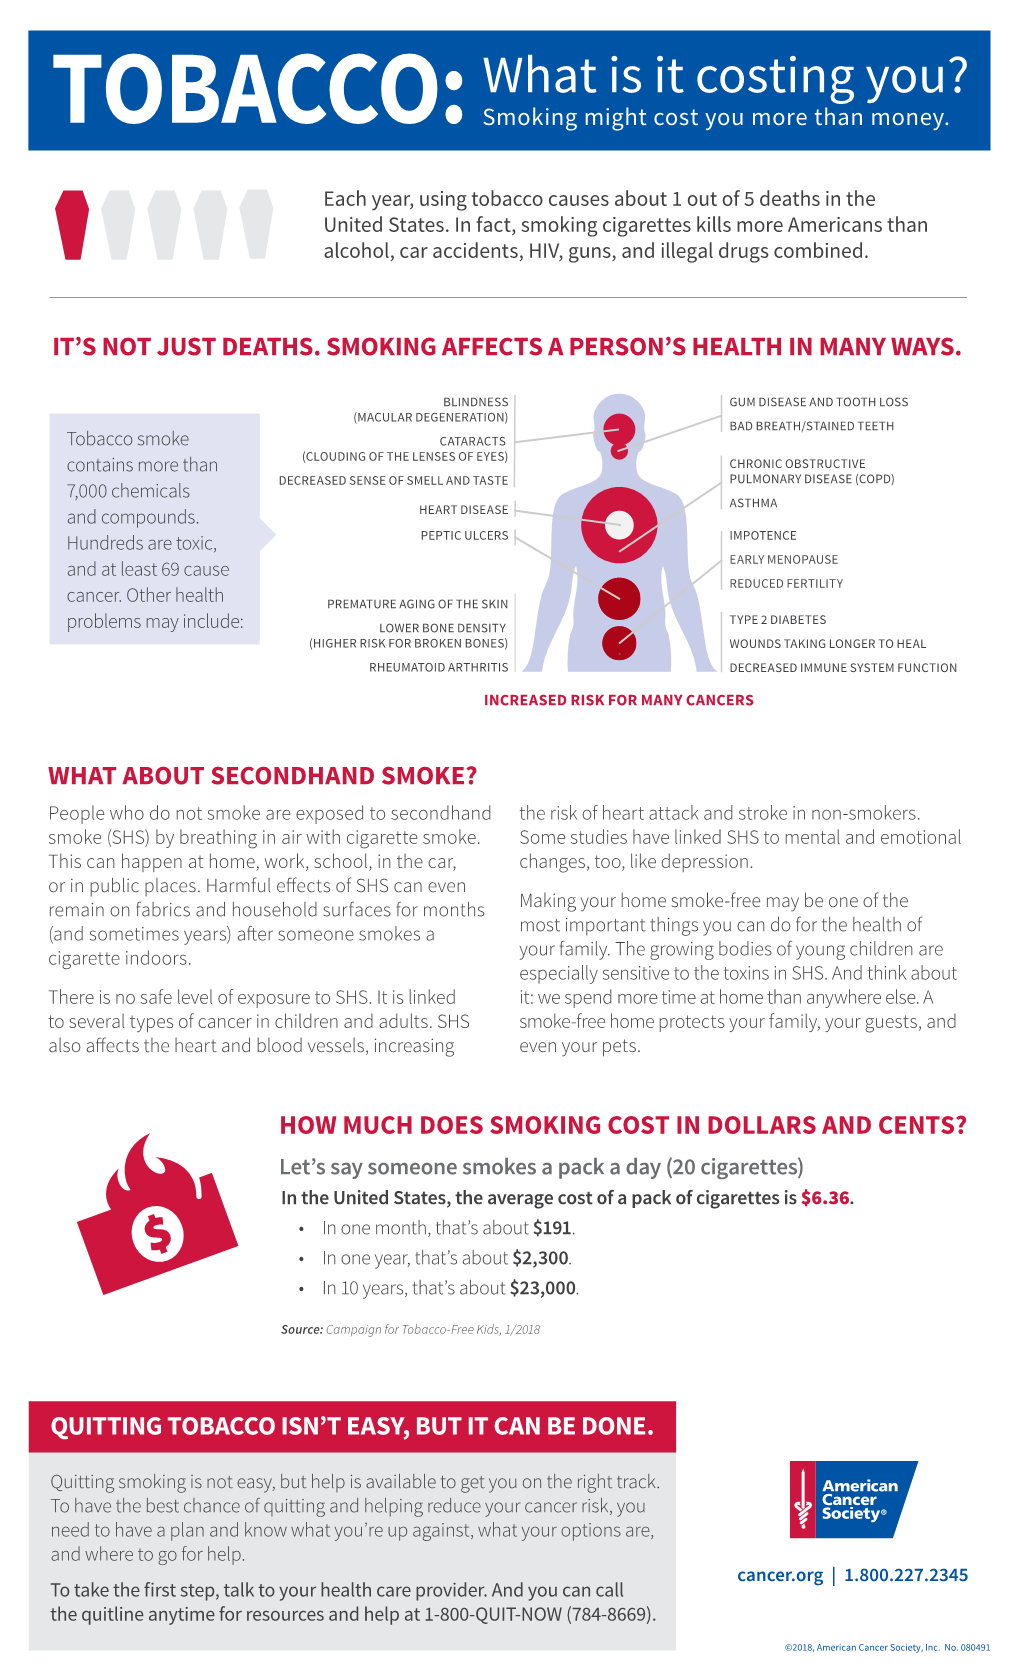 TOBACCO:What Is It Costing You?